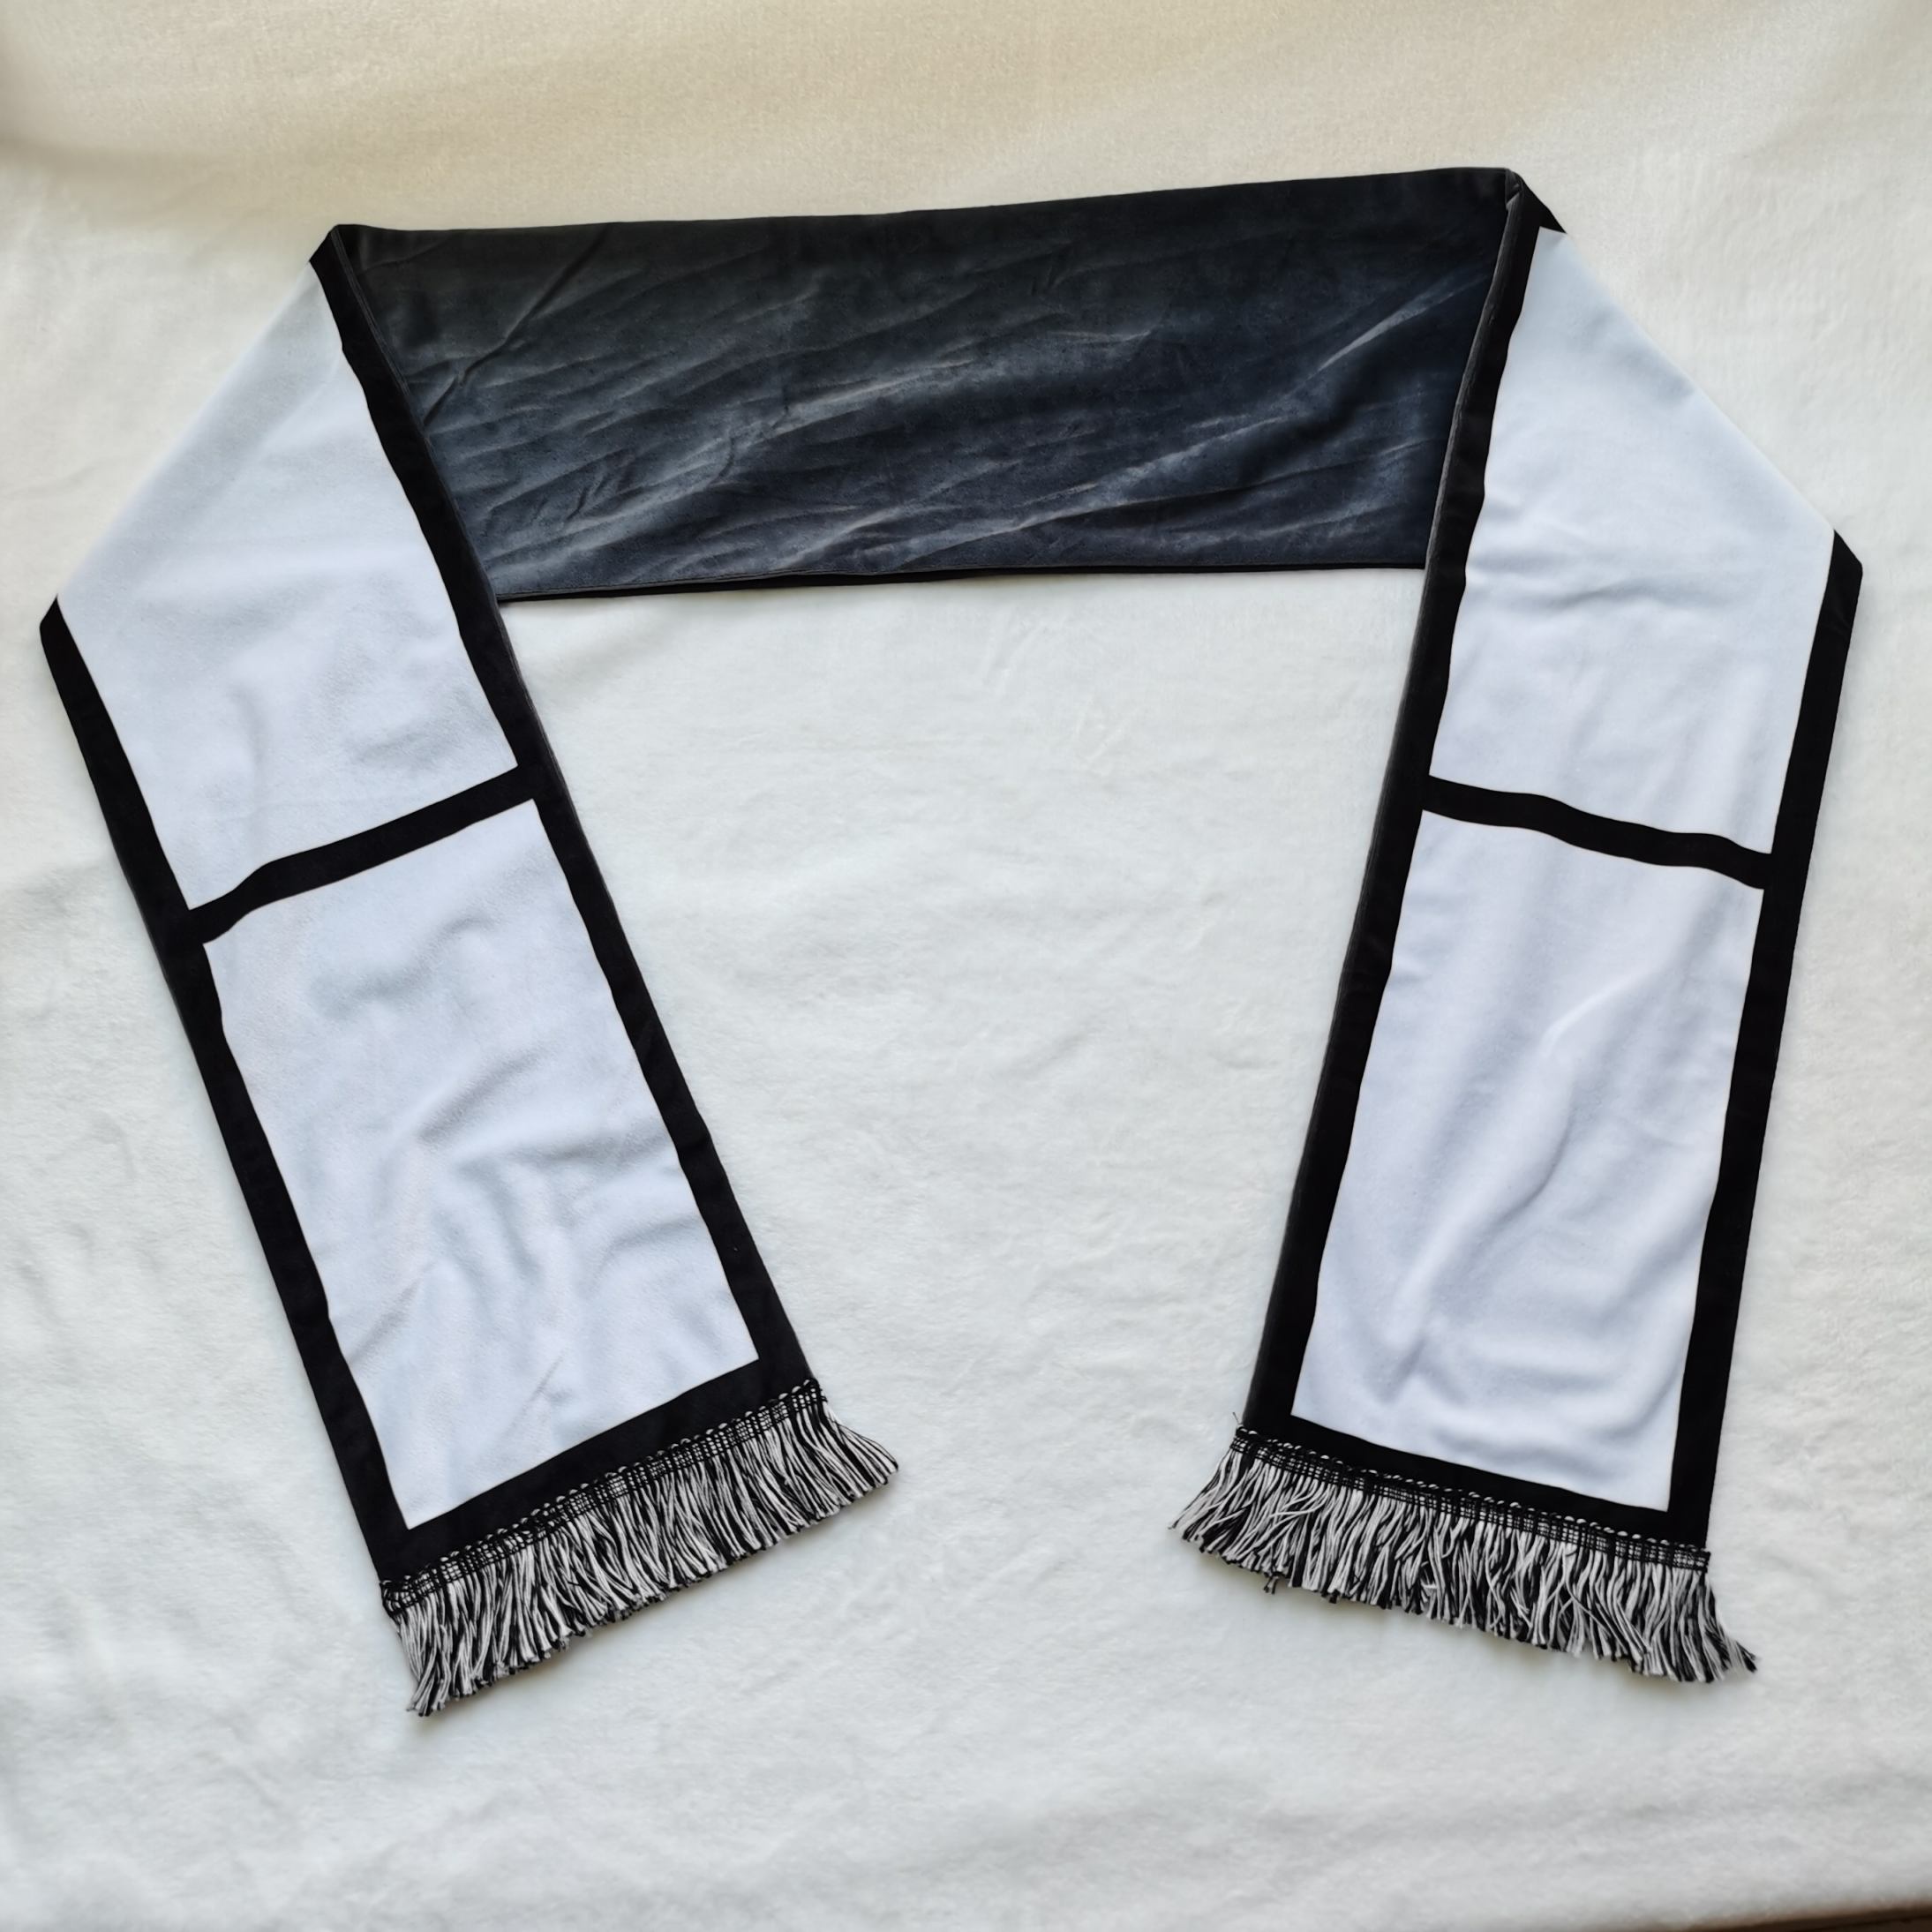 6 Panel Sublimation Adult Scarf (Blank)